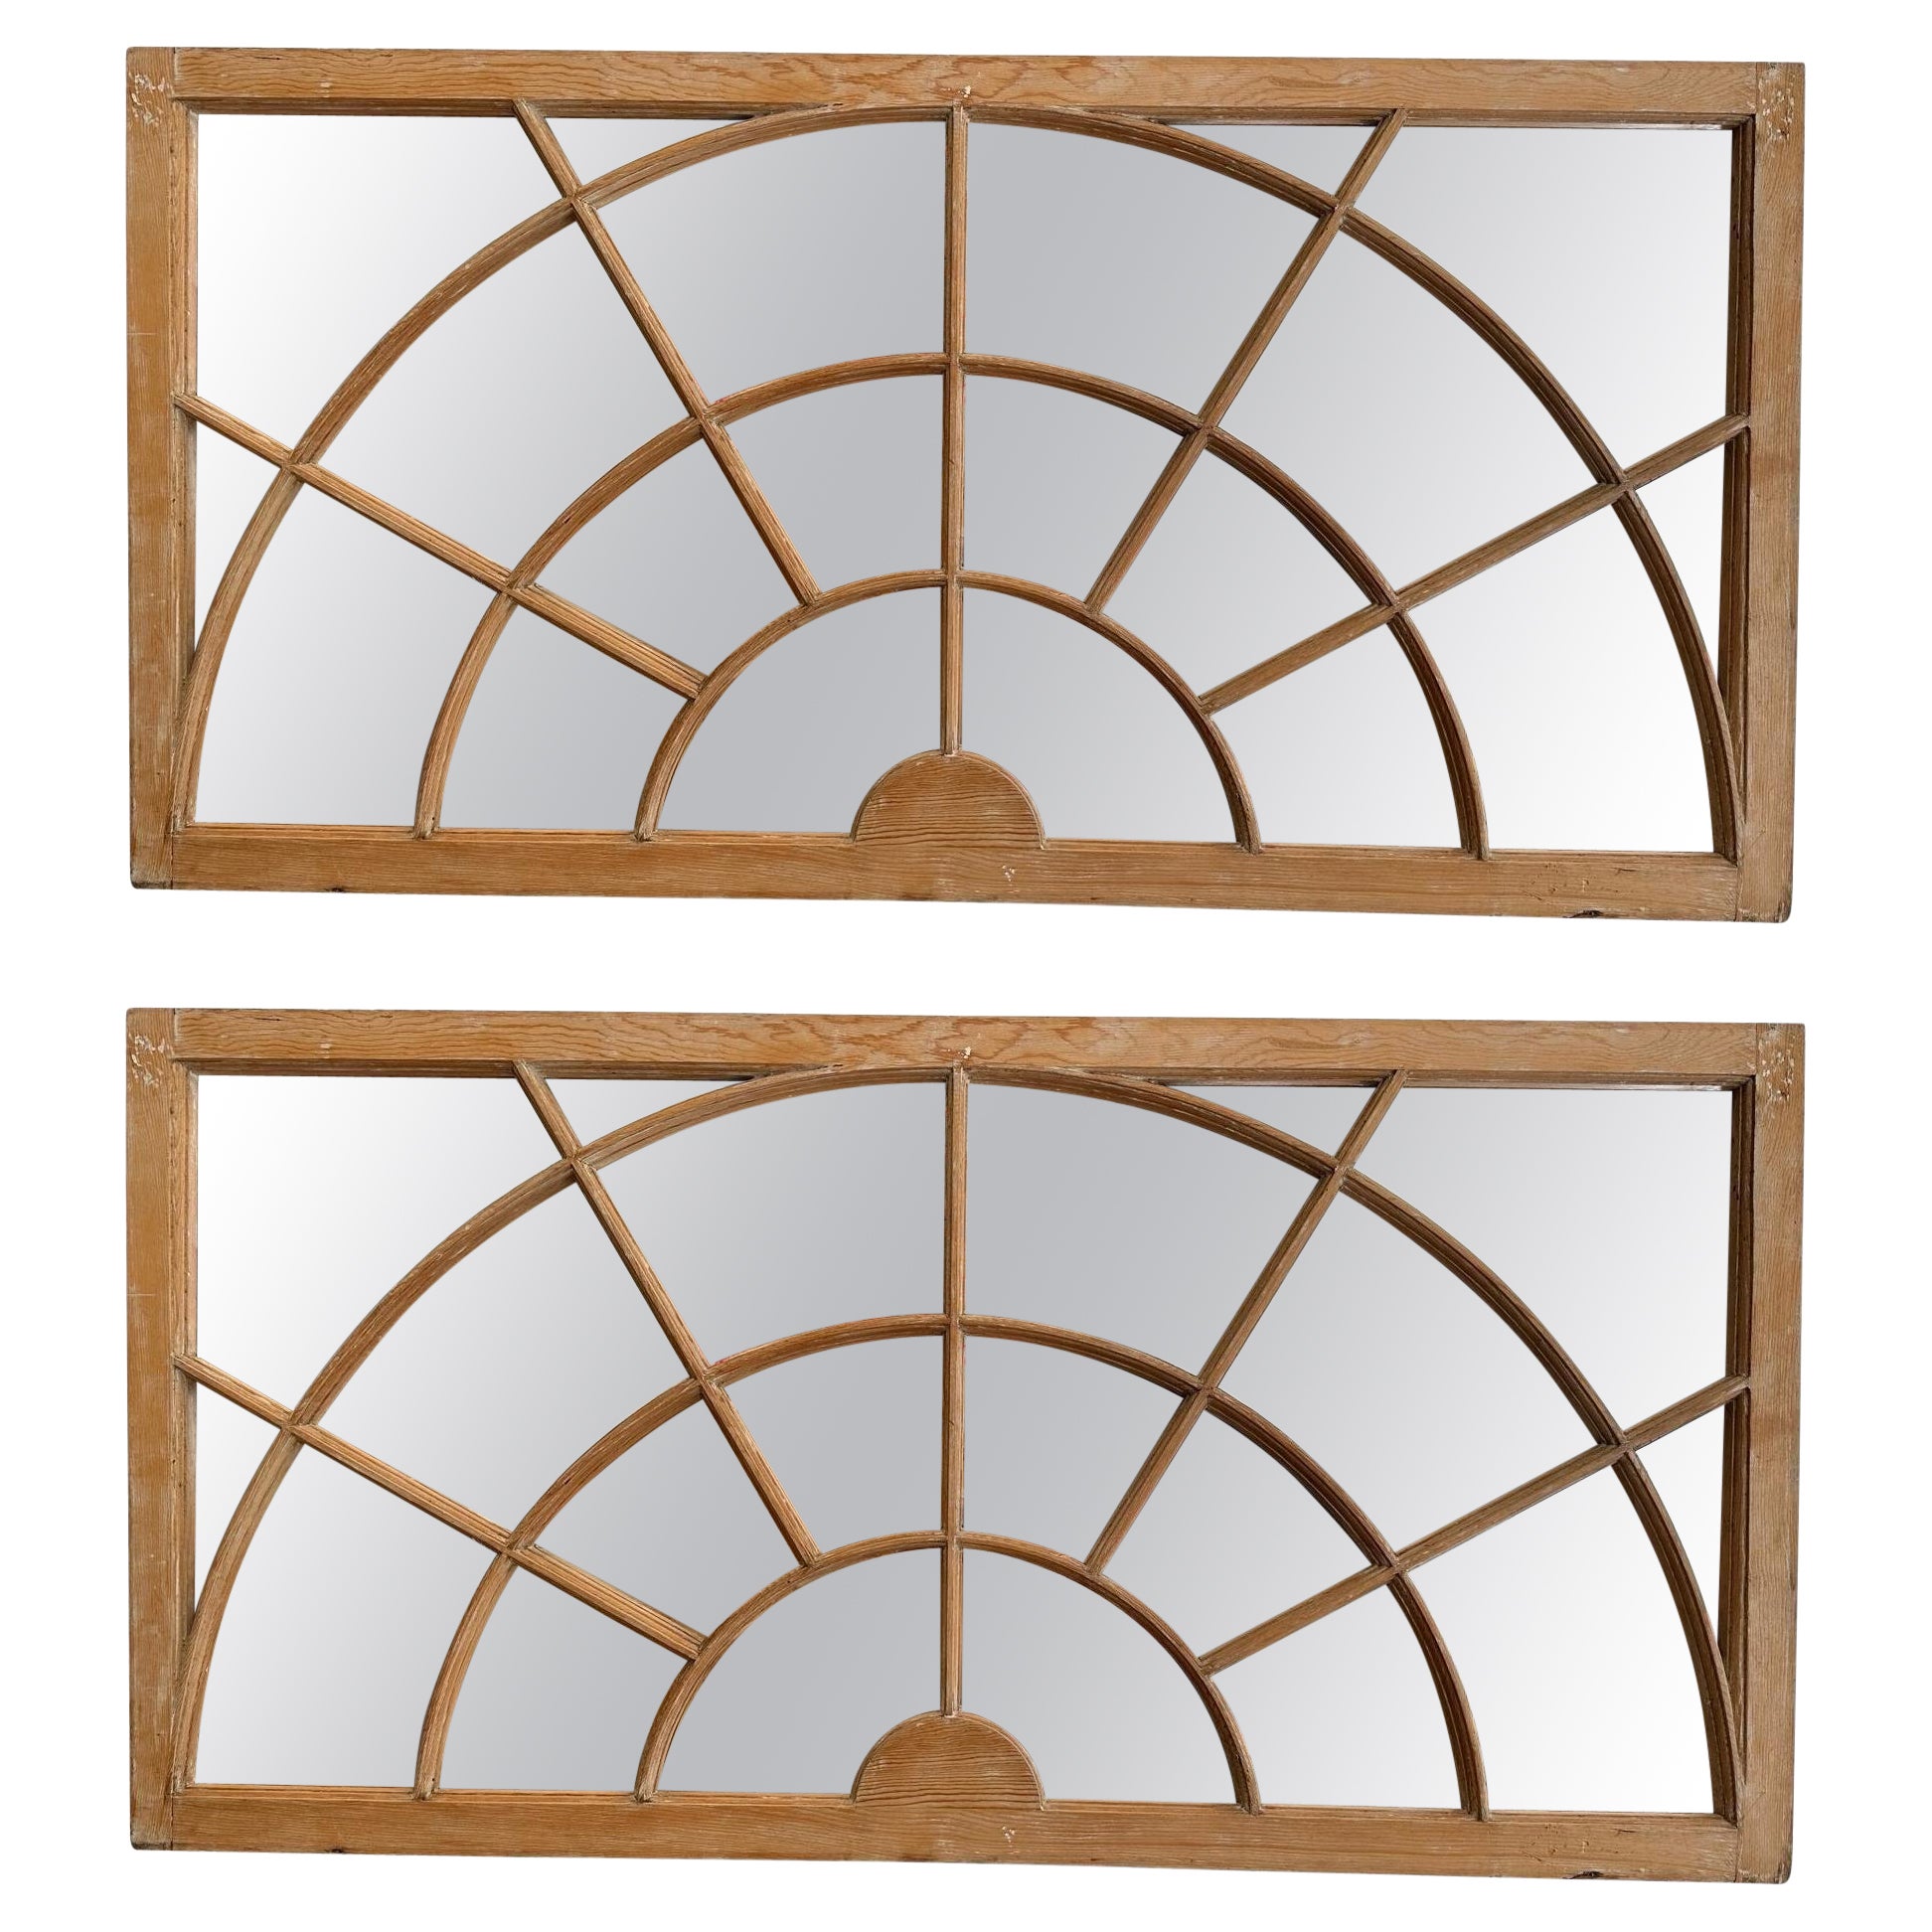 Unusual Pair of Georgian Styled Transom Windows Converted to Mirrors. For Sale